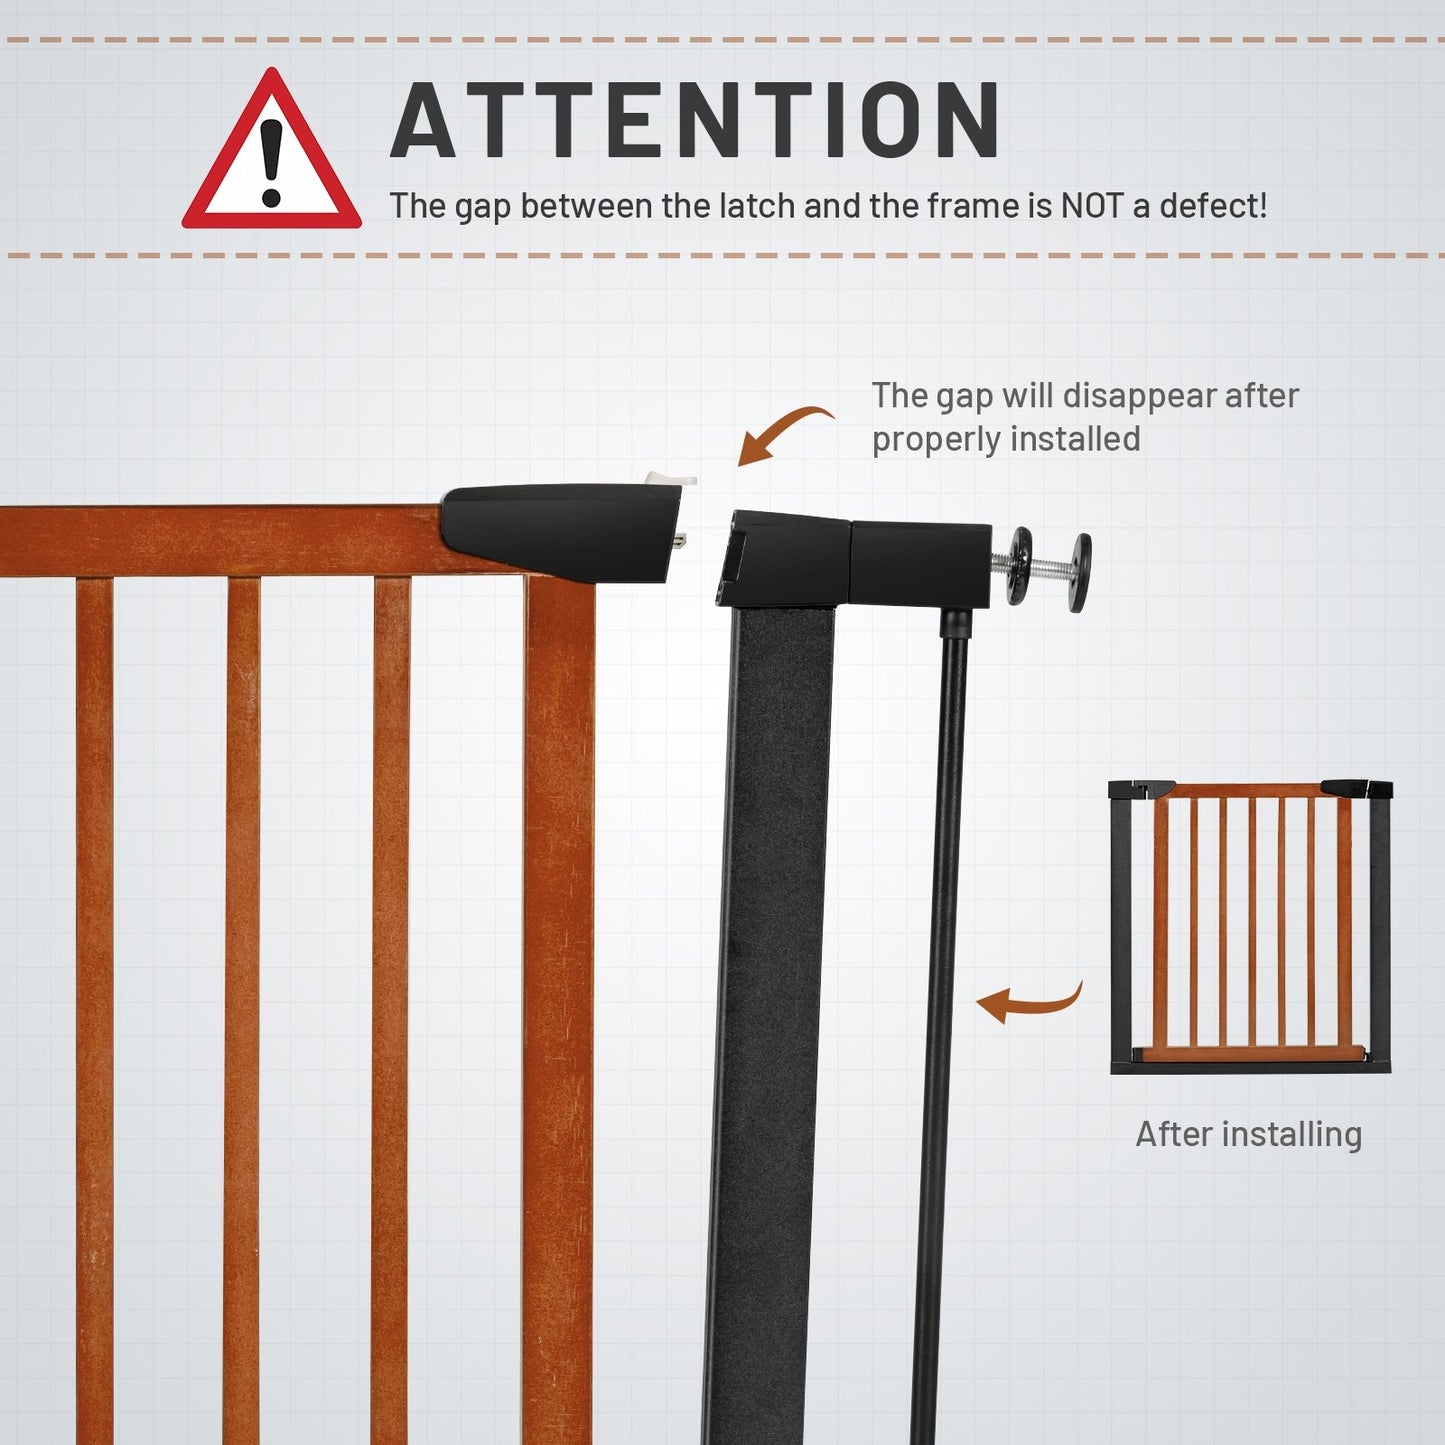 Extendable Safety Gate for Baby and Pet, Brown - Gallery Canada